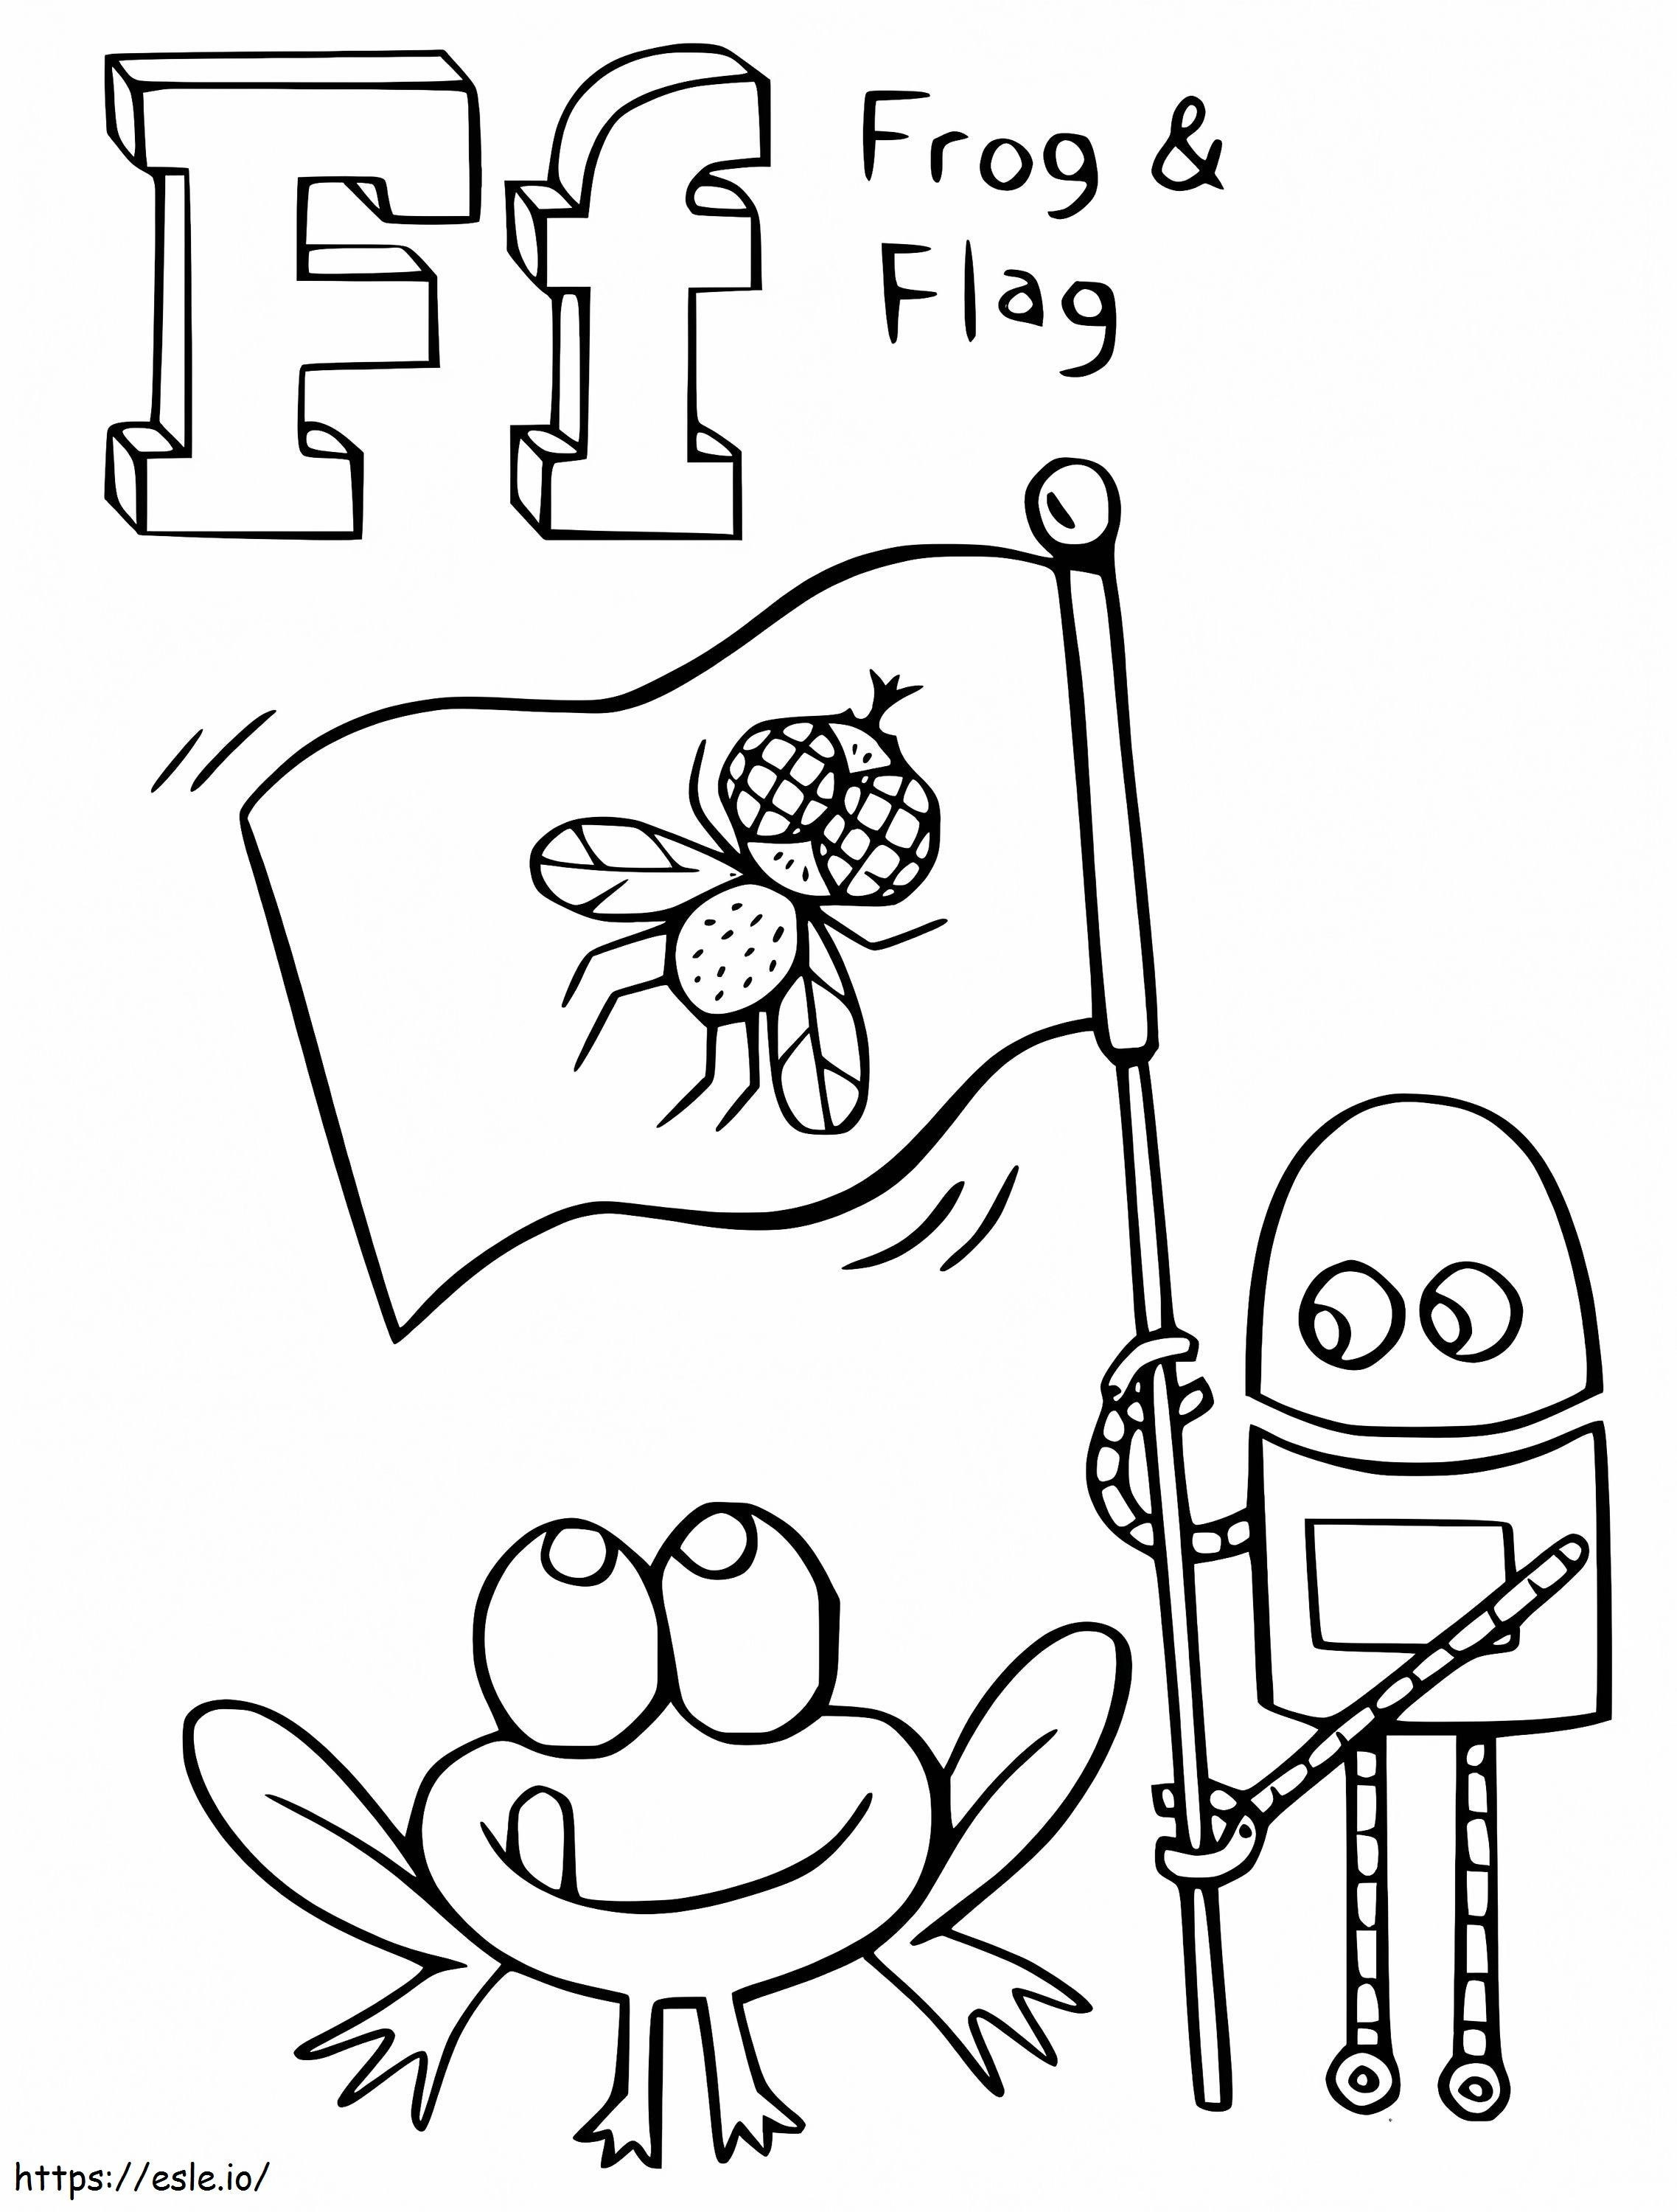 StoryBots Letter F coloring page